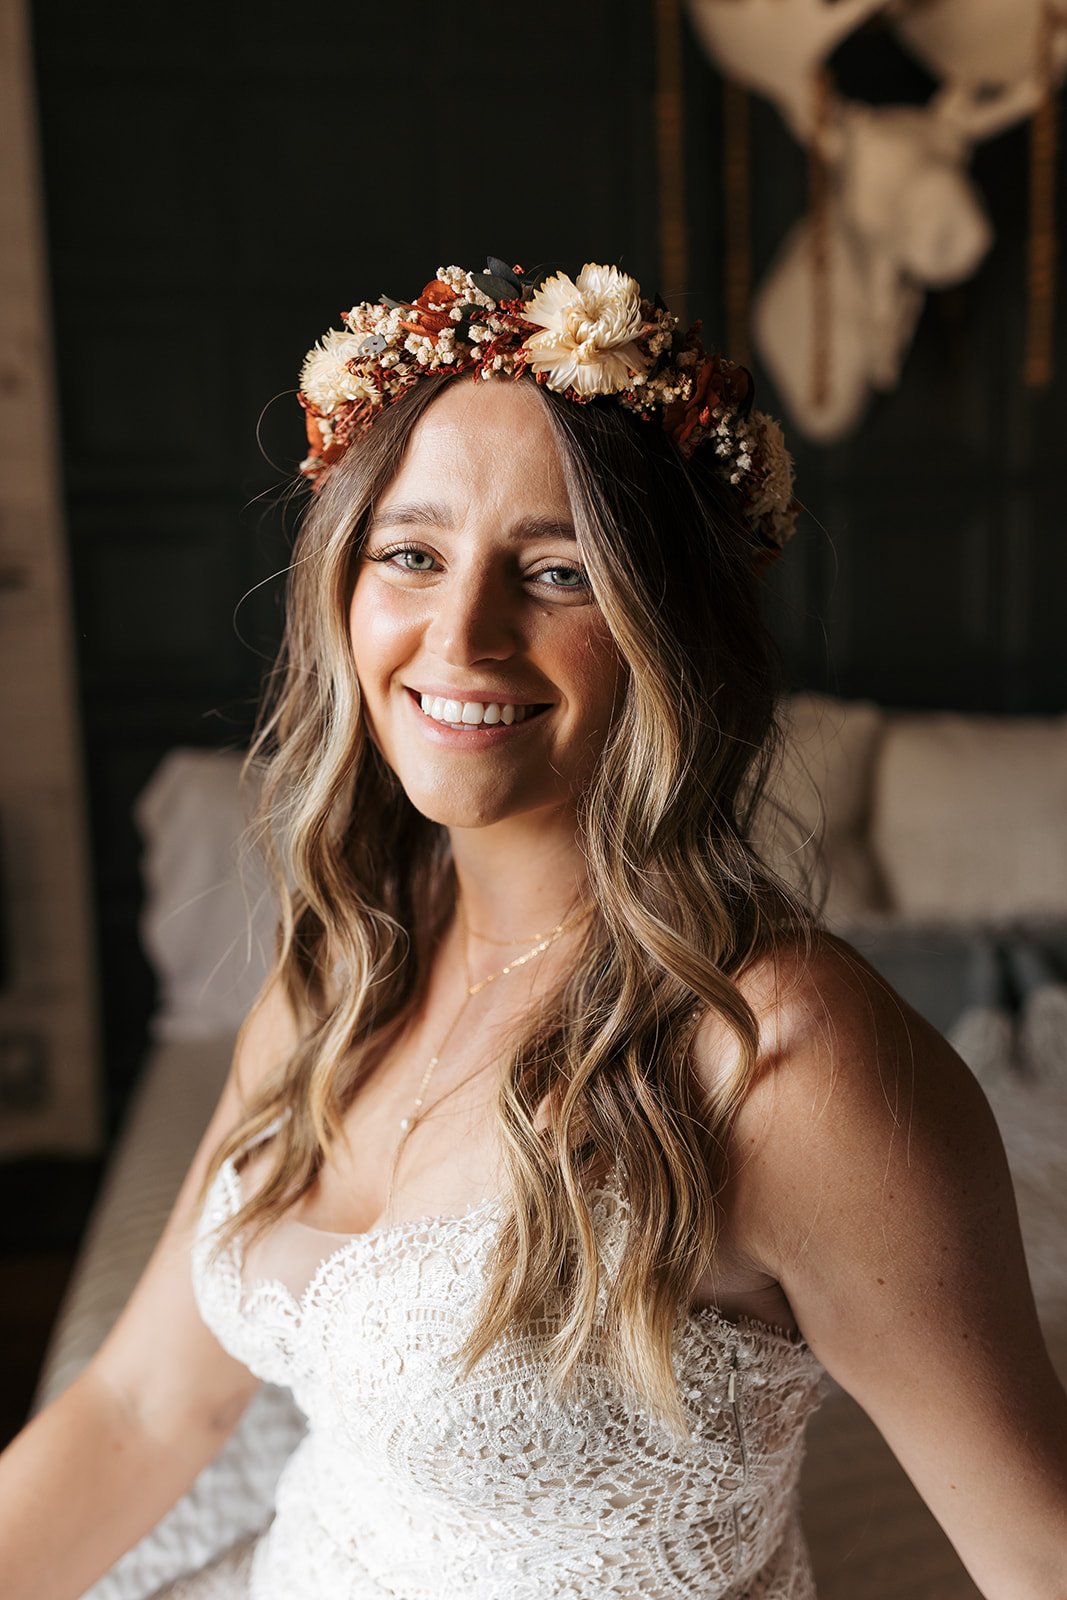 Perfect for her intimate fall wedding, Leah wears a dried flower crown with her soft curls